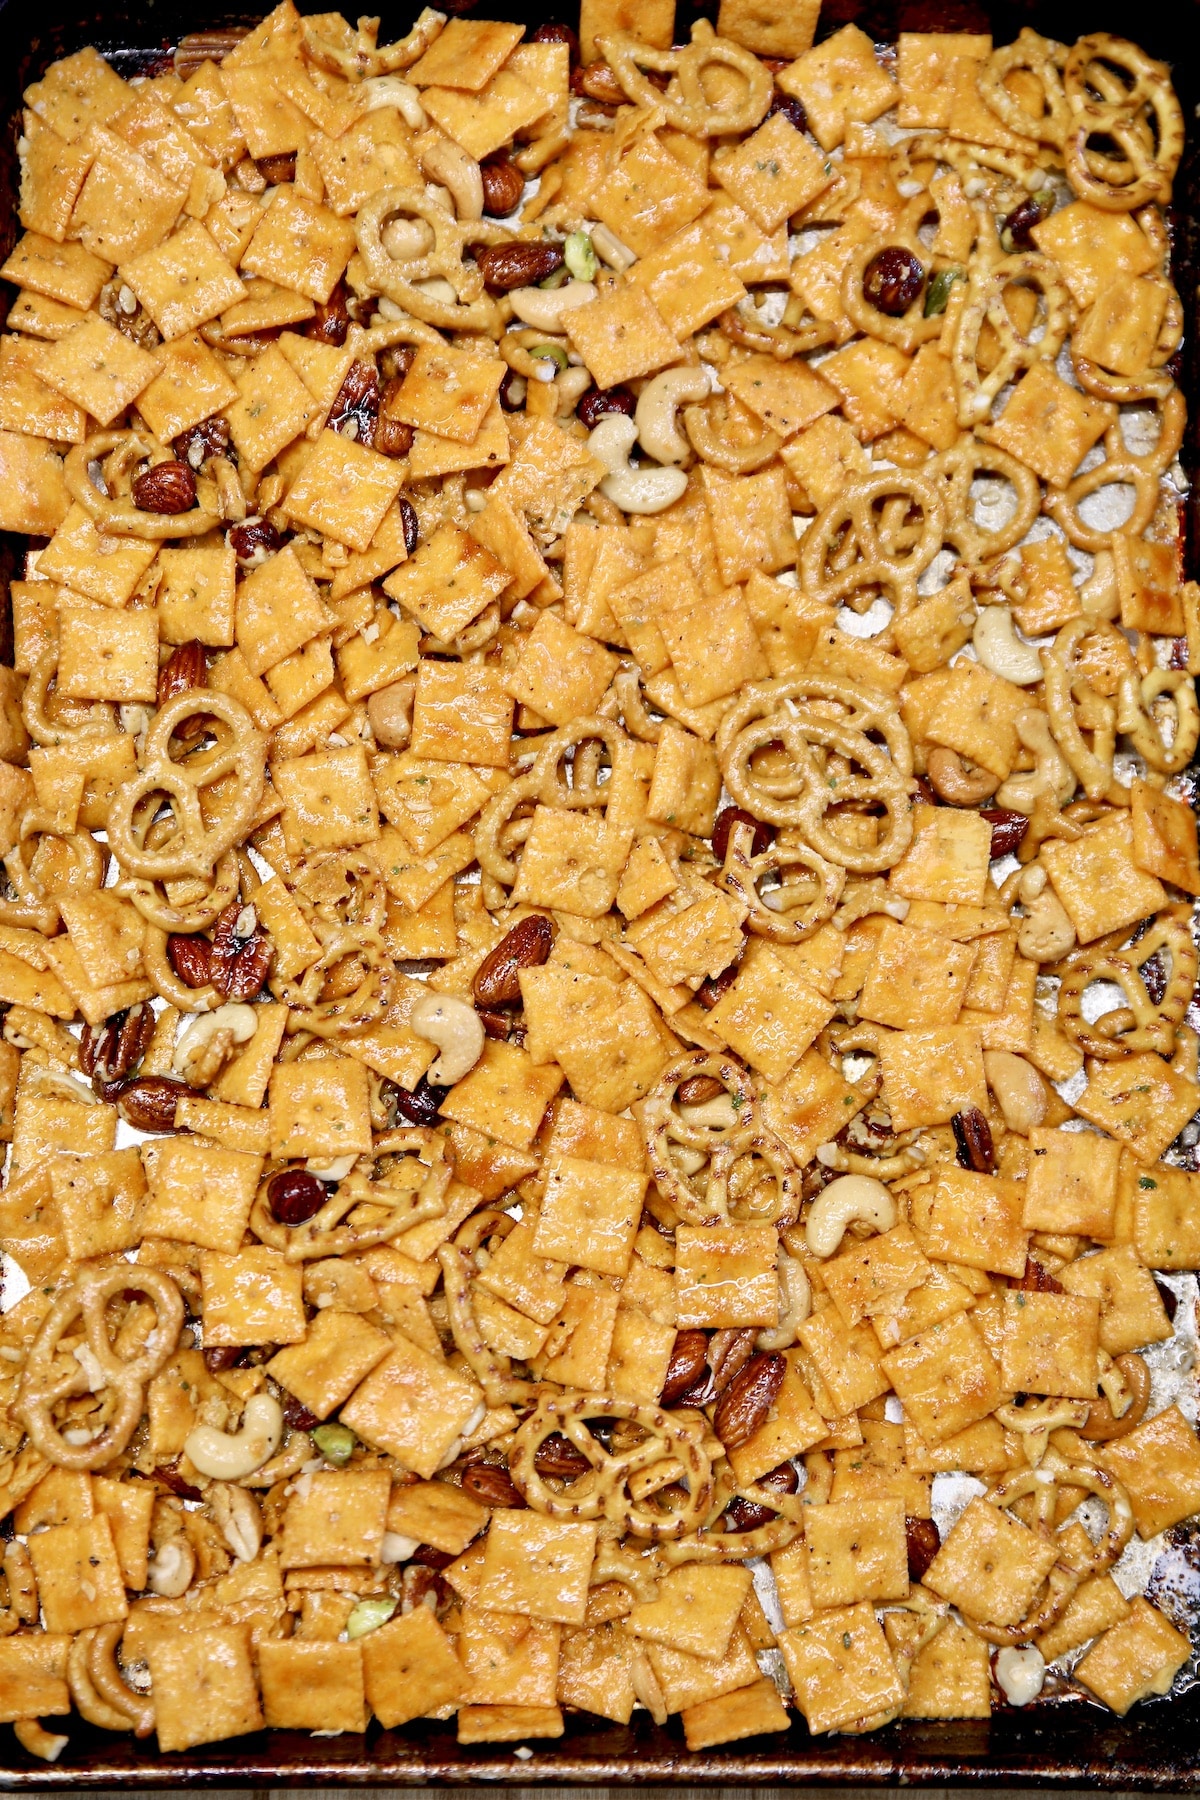 Cheez-It snack mix on a sheet pan with nuts and pretzels.